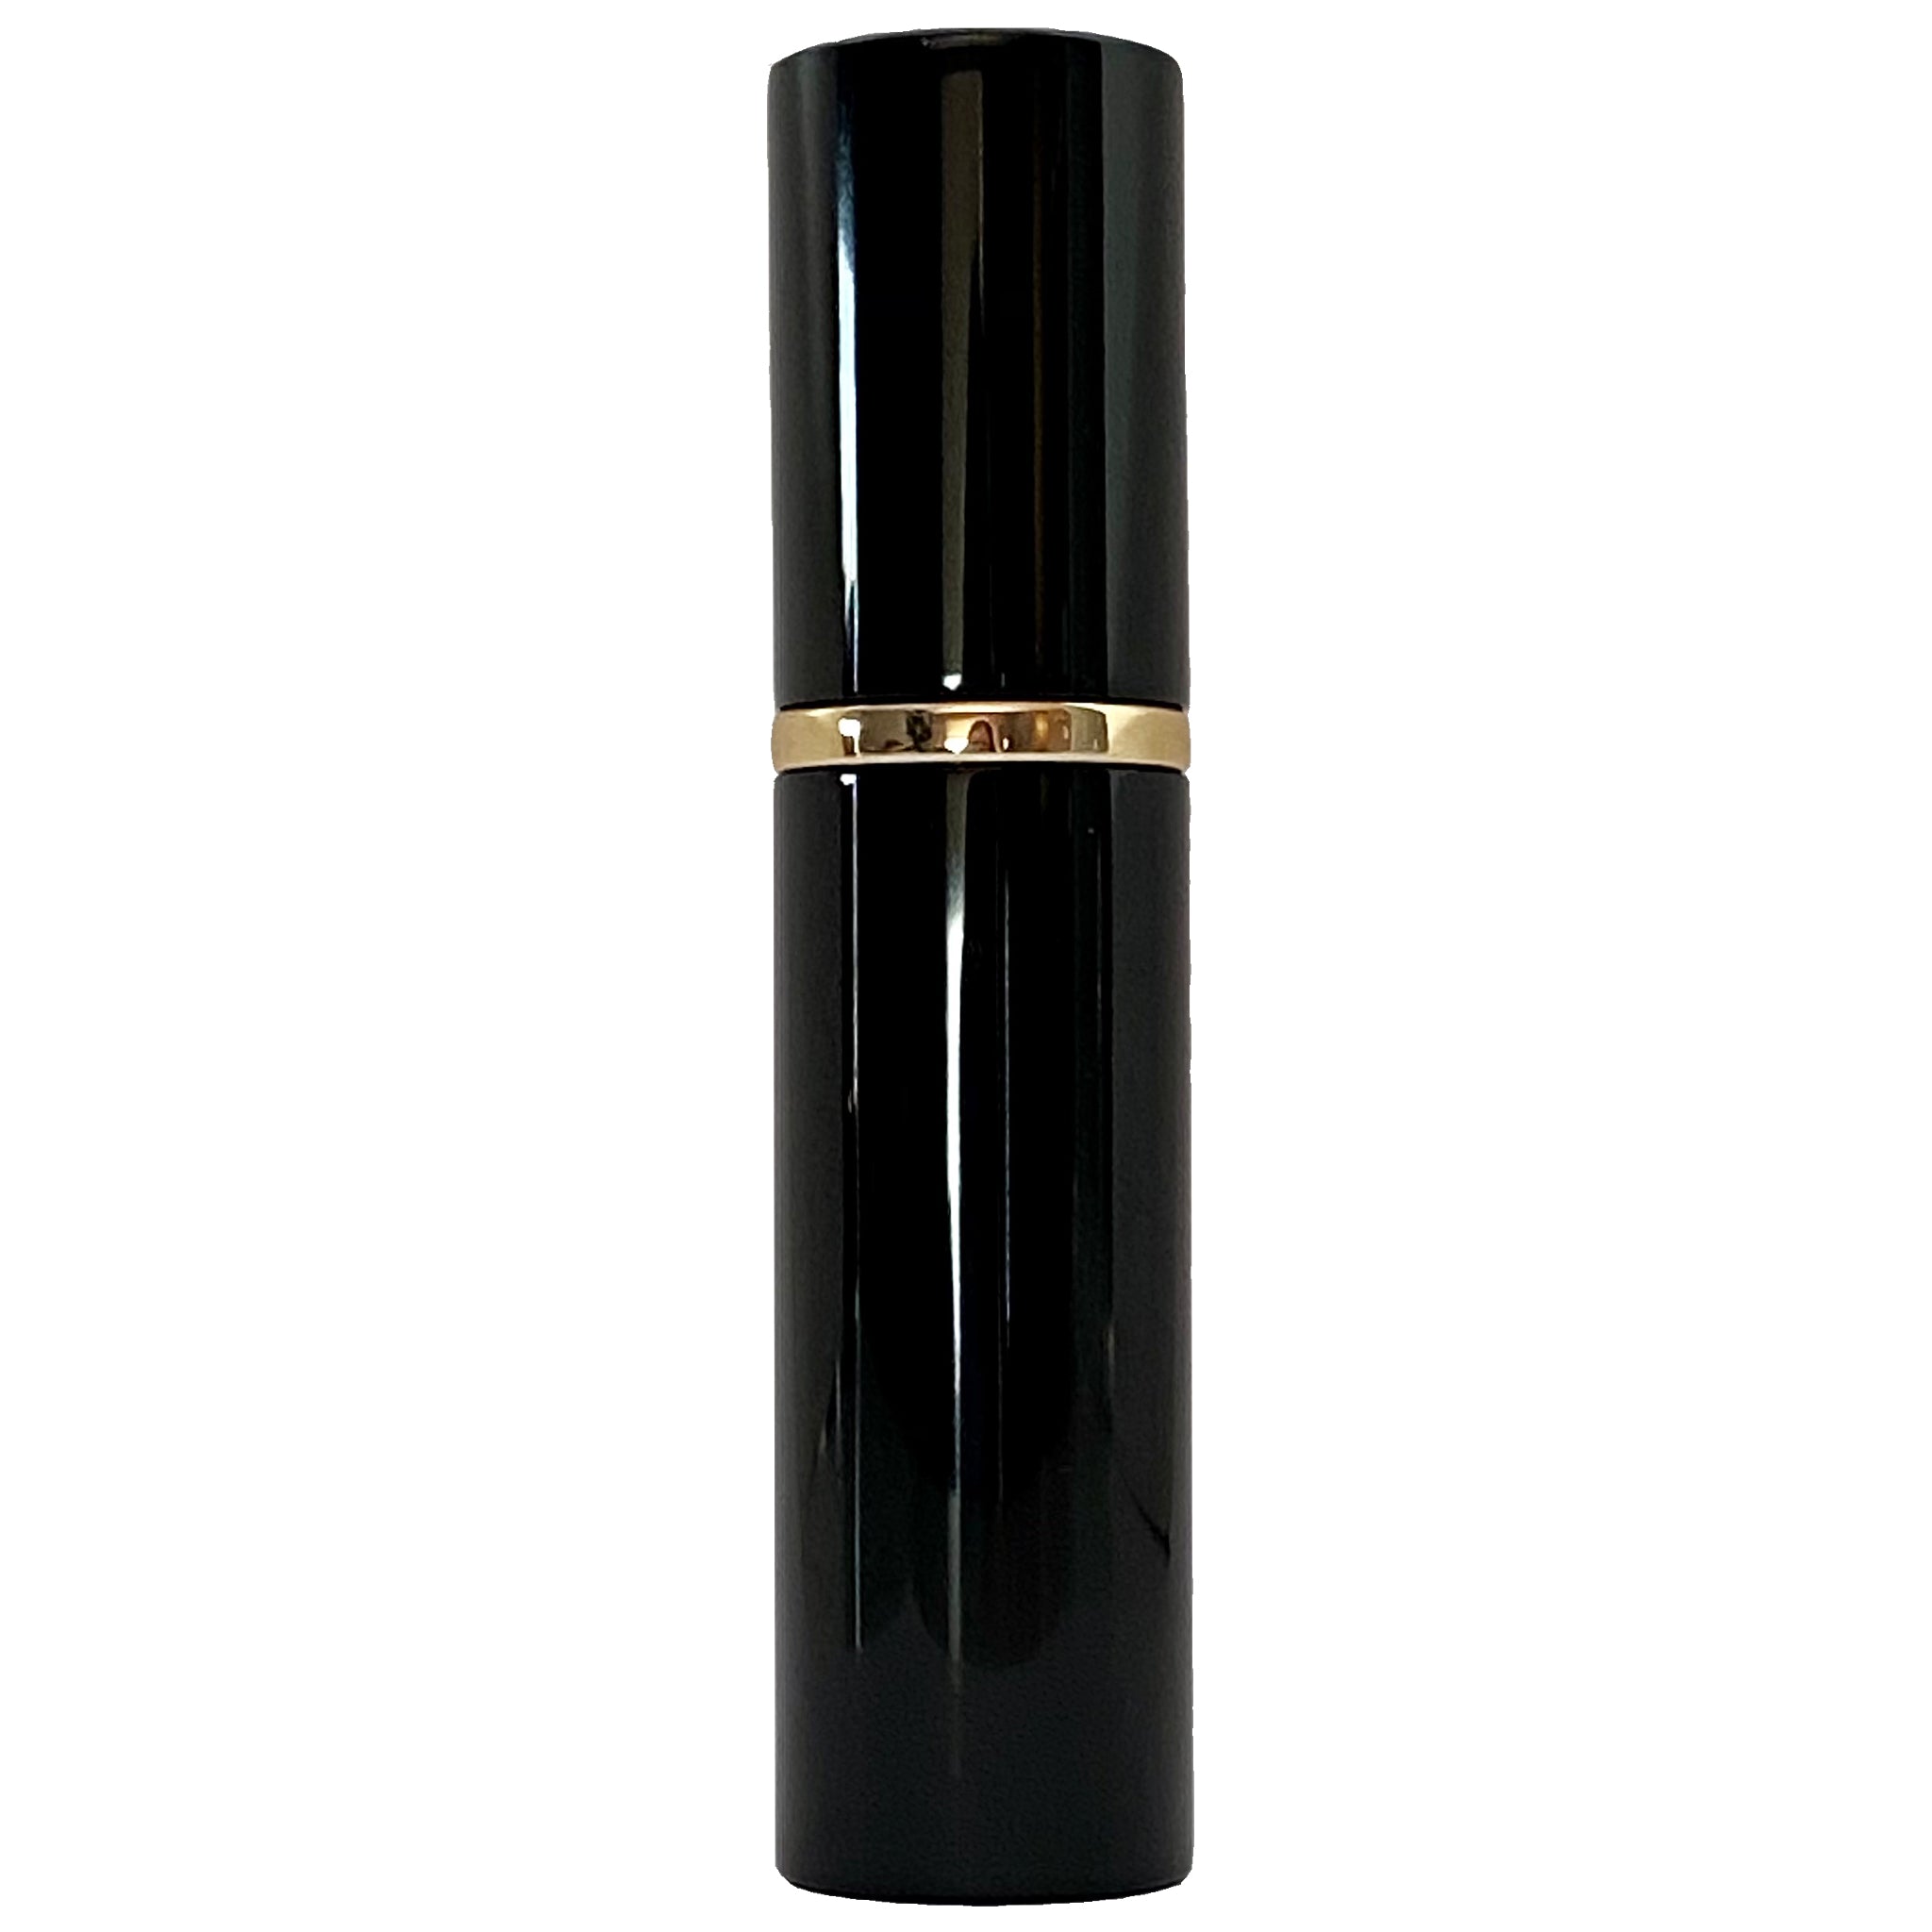 The Attrape-rÊves Large Gold Luxe Travel Atomizer Half Ounce 15ml